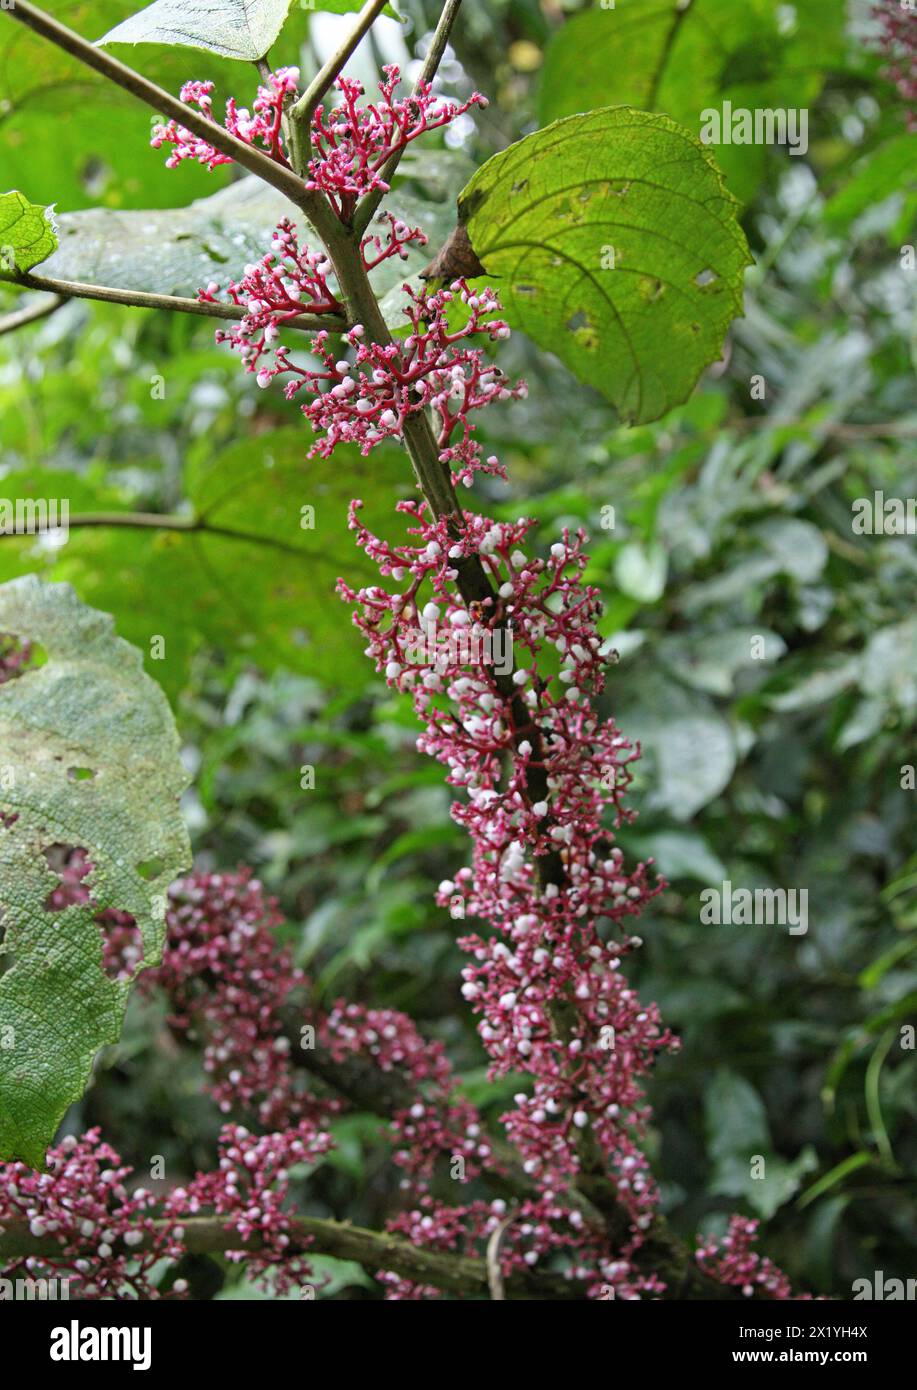 Scratchbush, Urera baccifera, Urticaceae. Arenal Volcano National park, Costa Rica. Unusual tree with white berries growing straight out of branches. Stock Photo